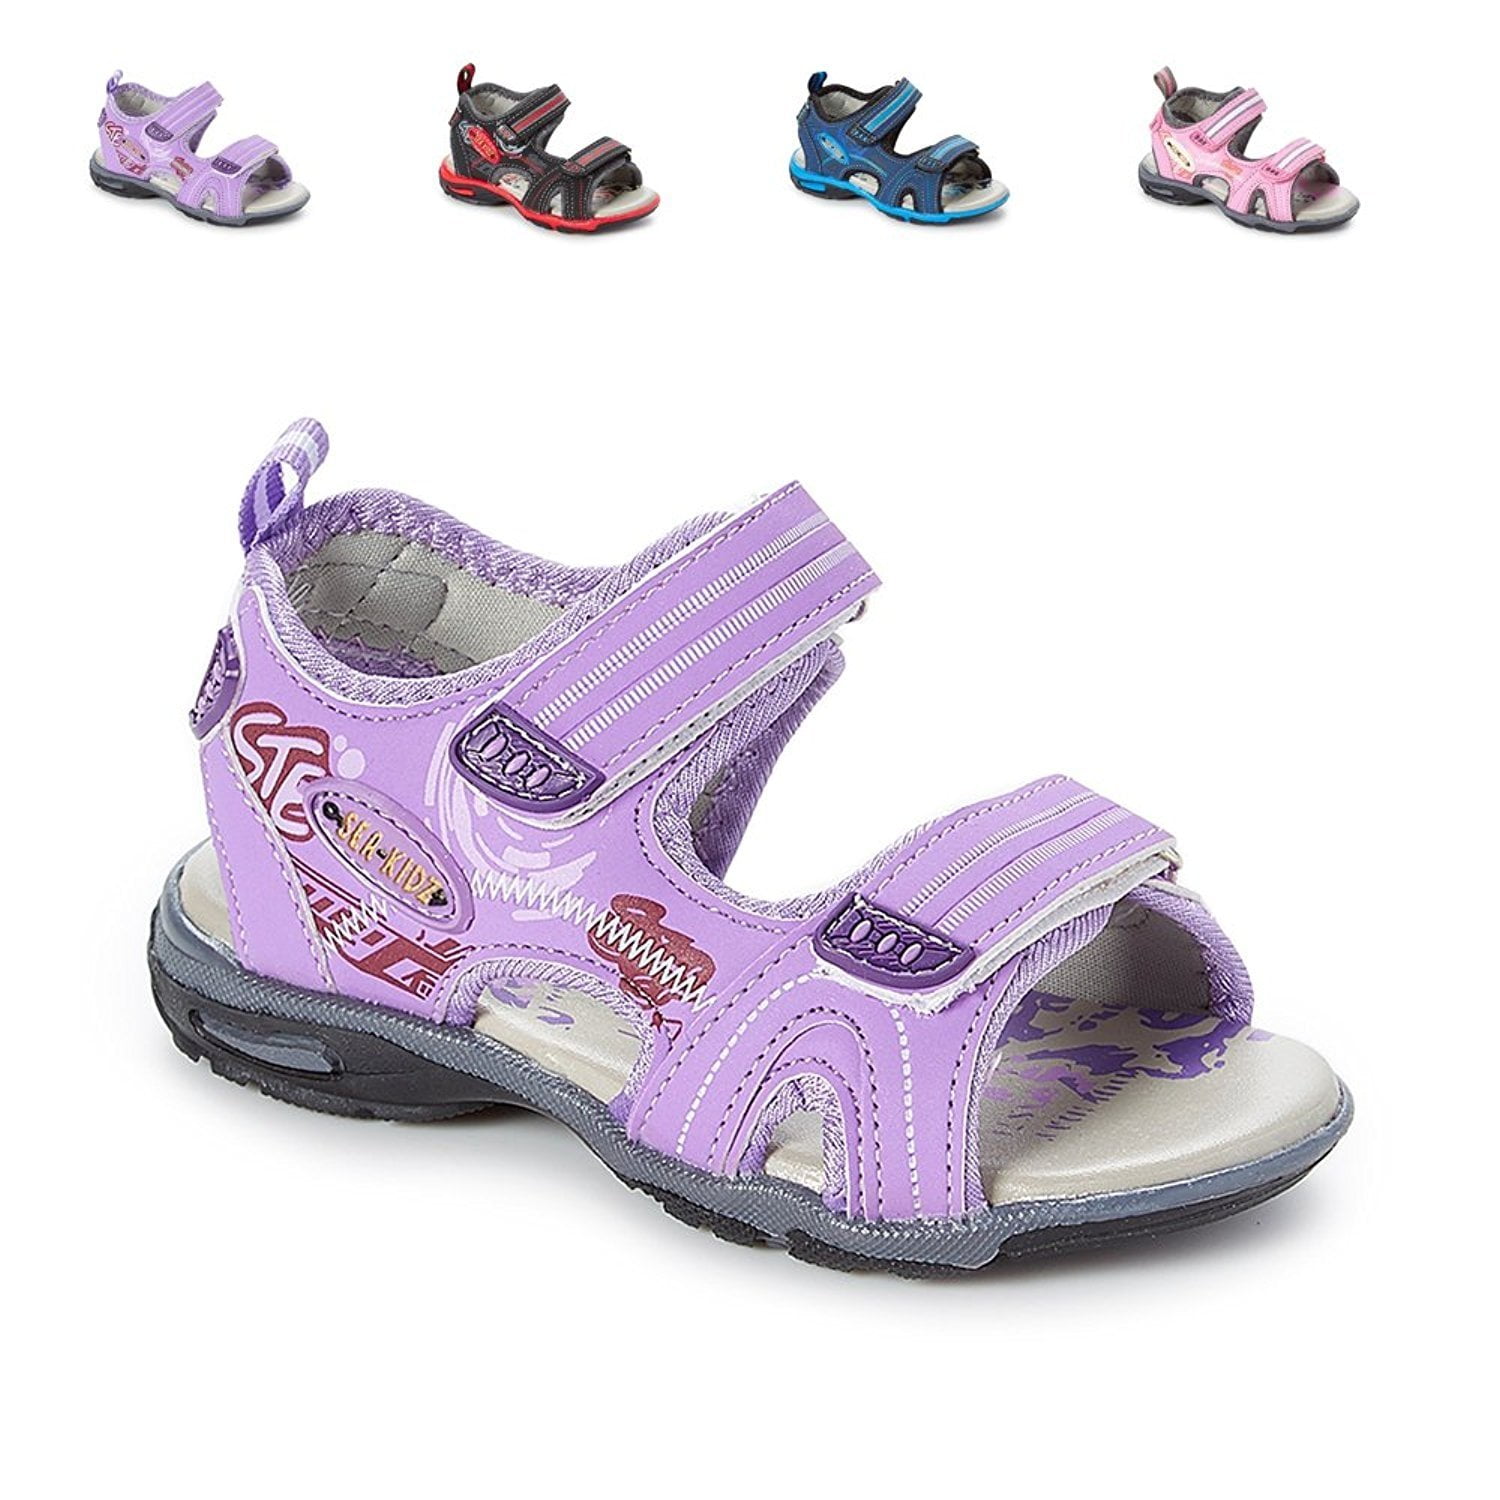 hiking sandals for boys